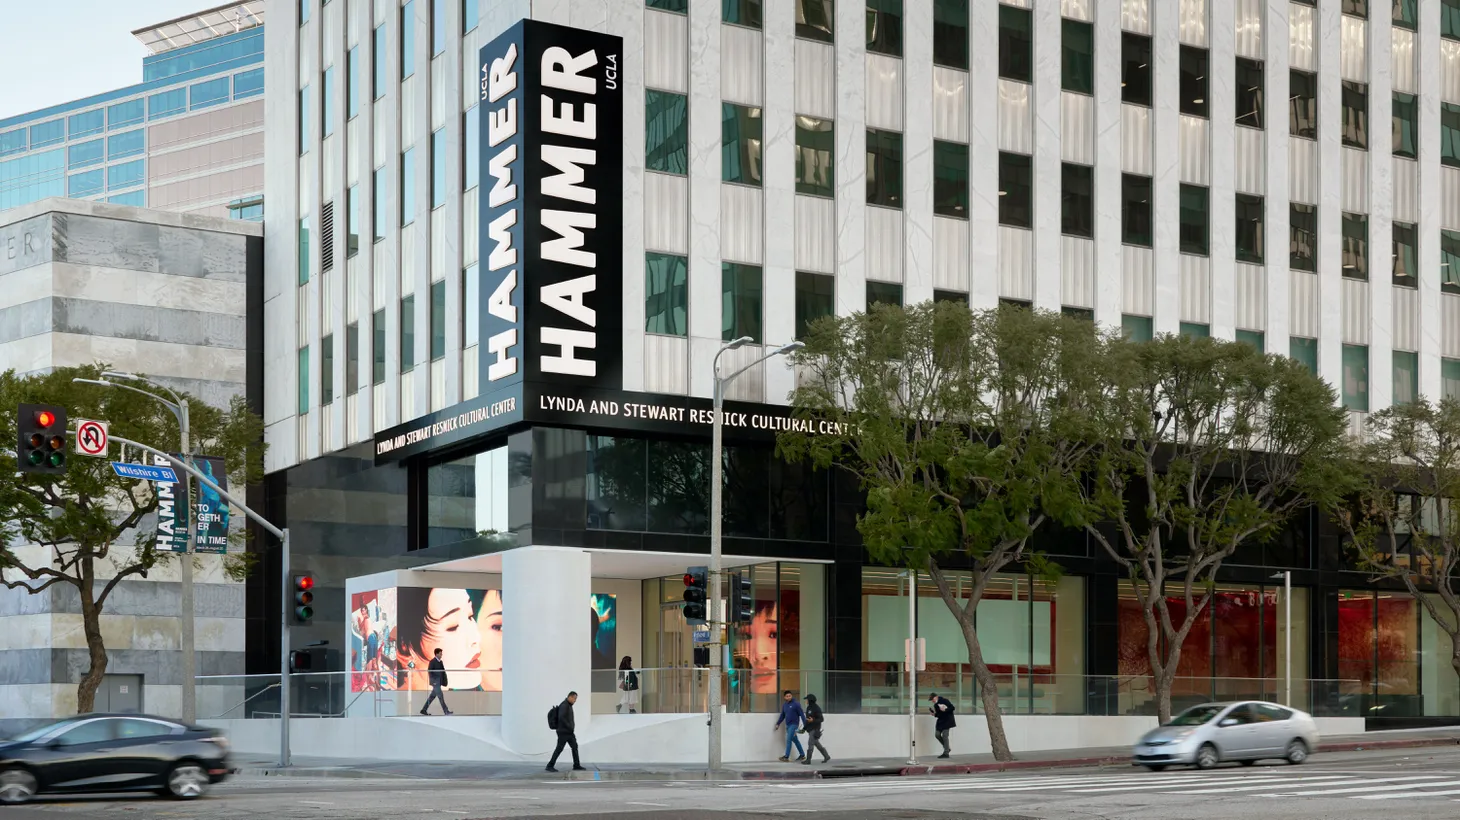 The Hammer Museum recently opened a new entryway and lobby complete with large-scale art installations.